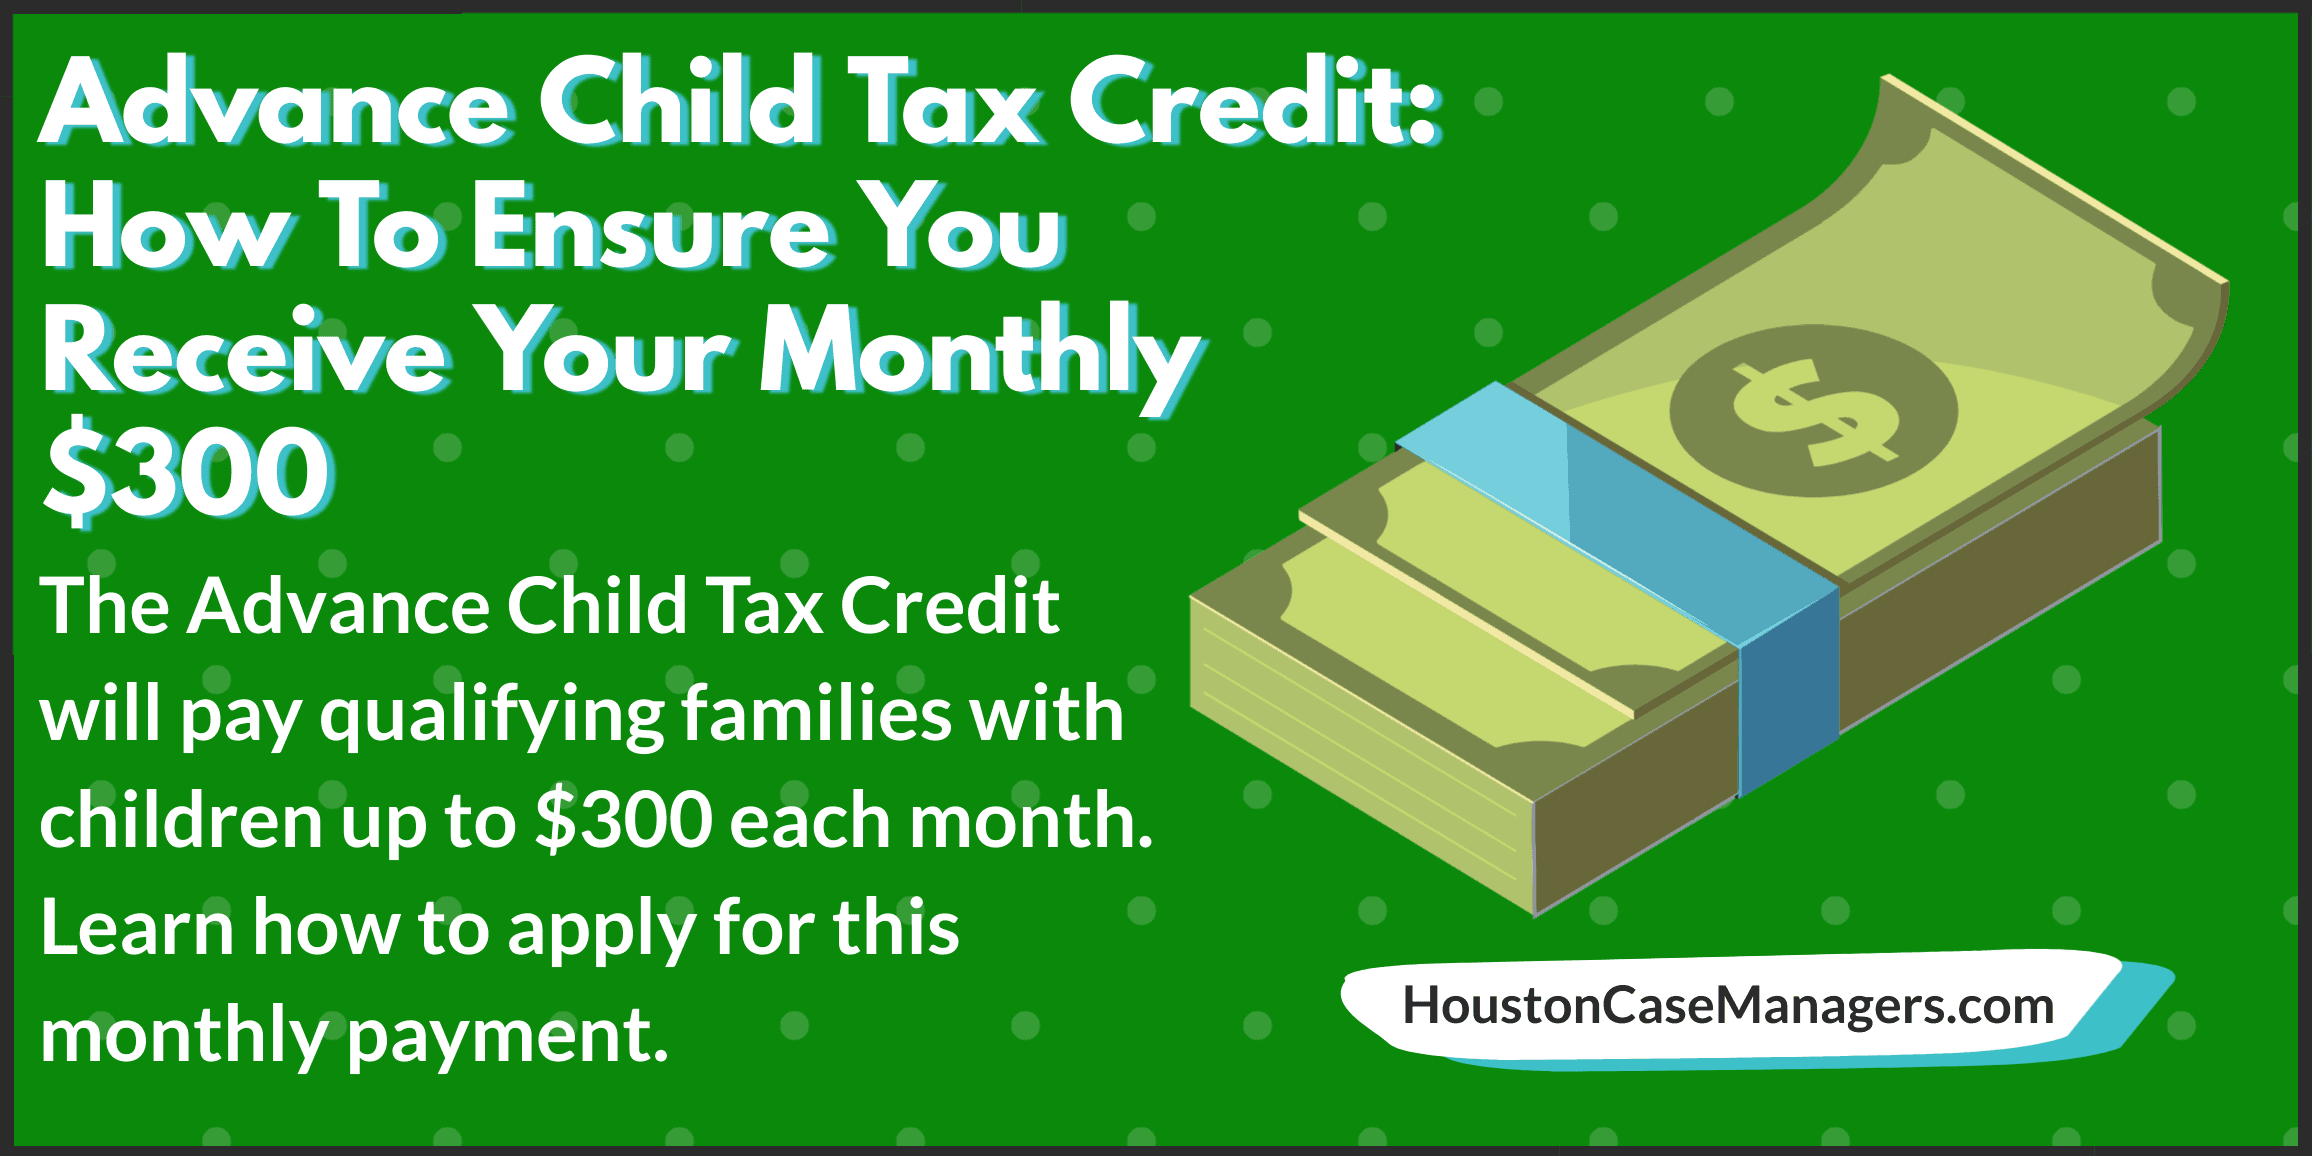 Advance Child Tax Credit: How To Ensure You Receive Your Monthly $300